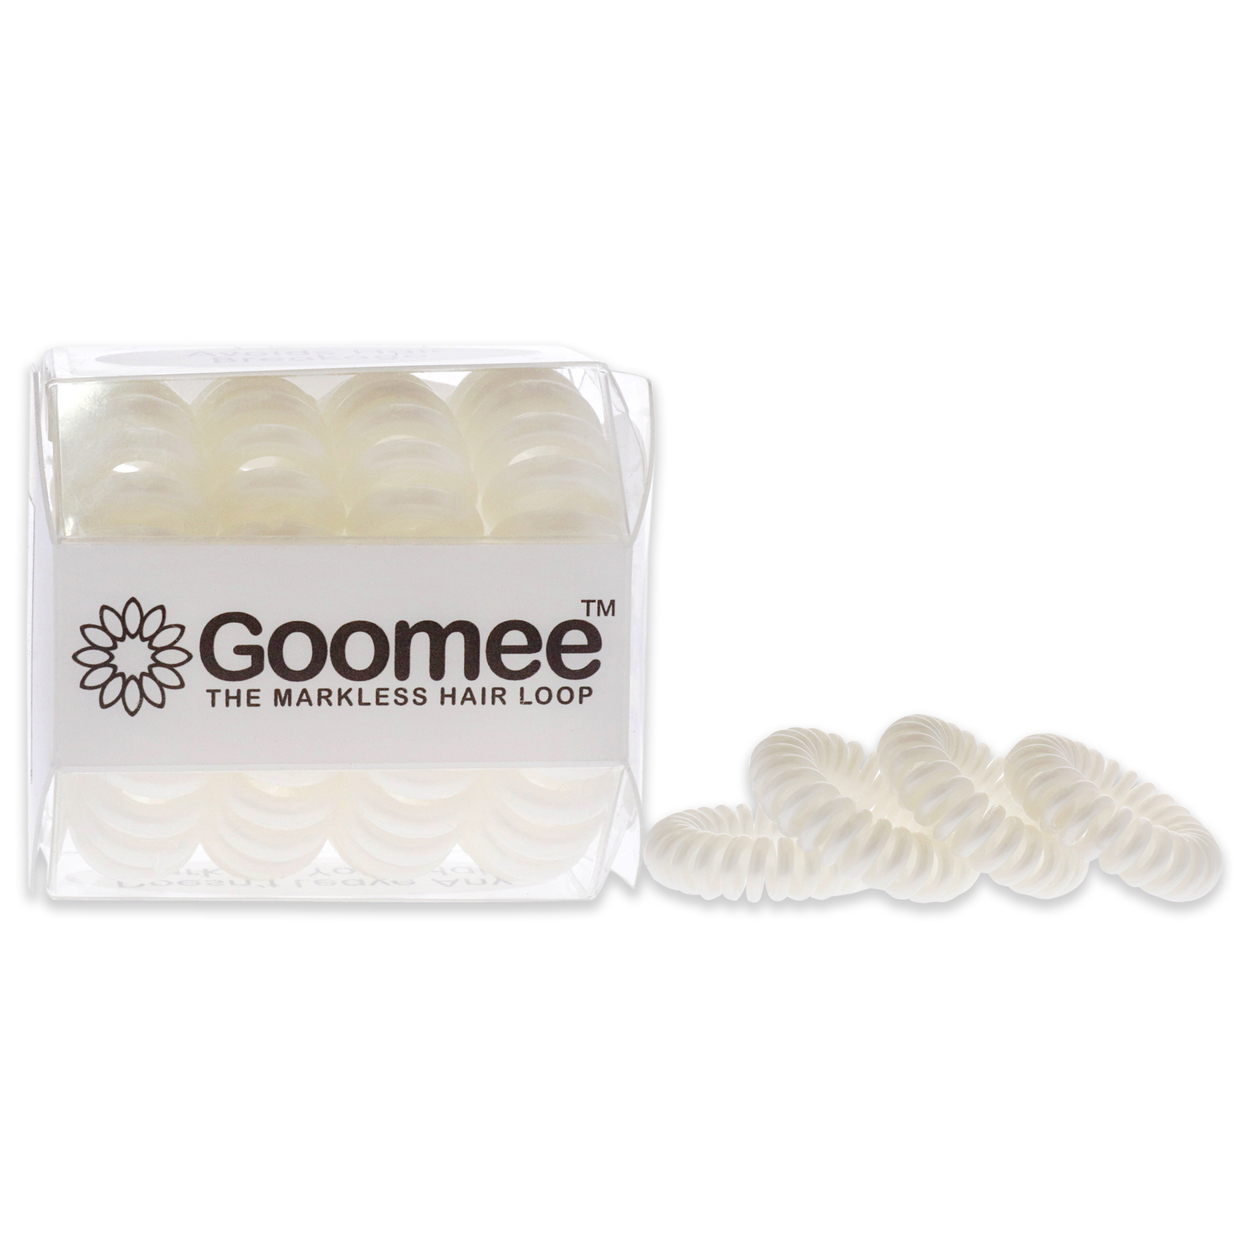 Goomee The Markless Hair Loop Set - Pearly White Hair Tie 4 Pc